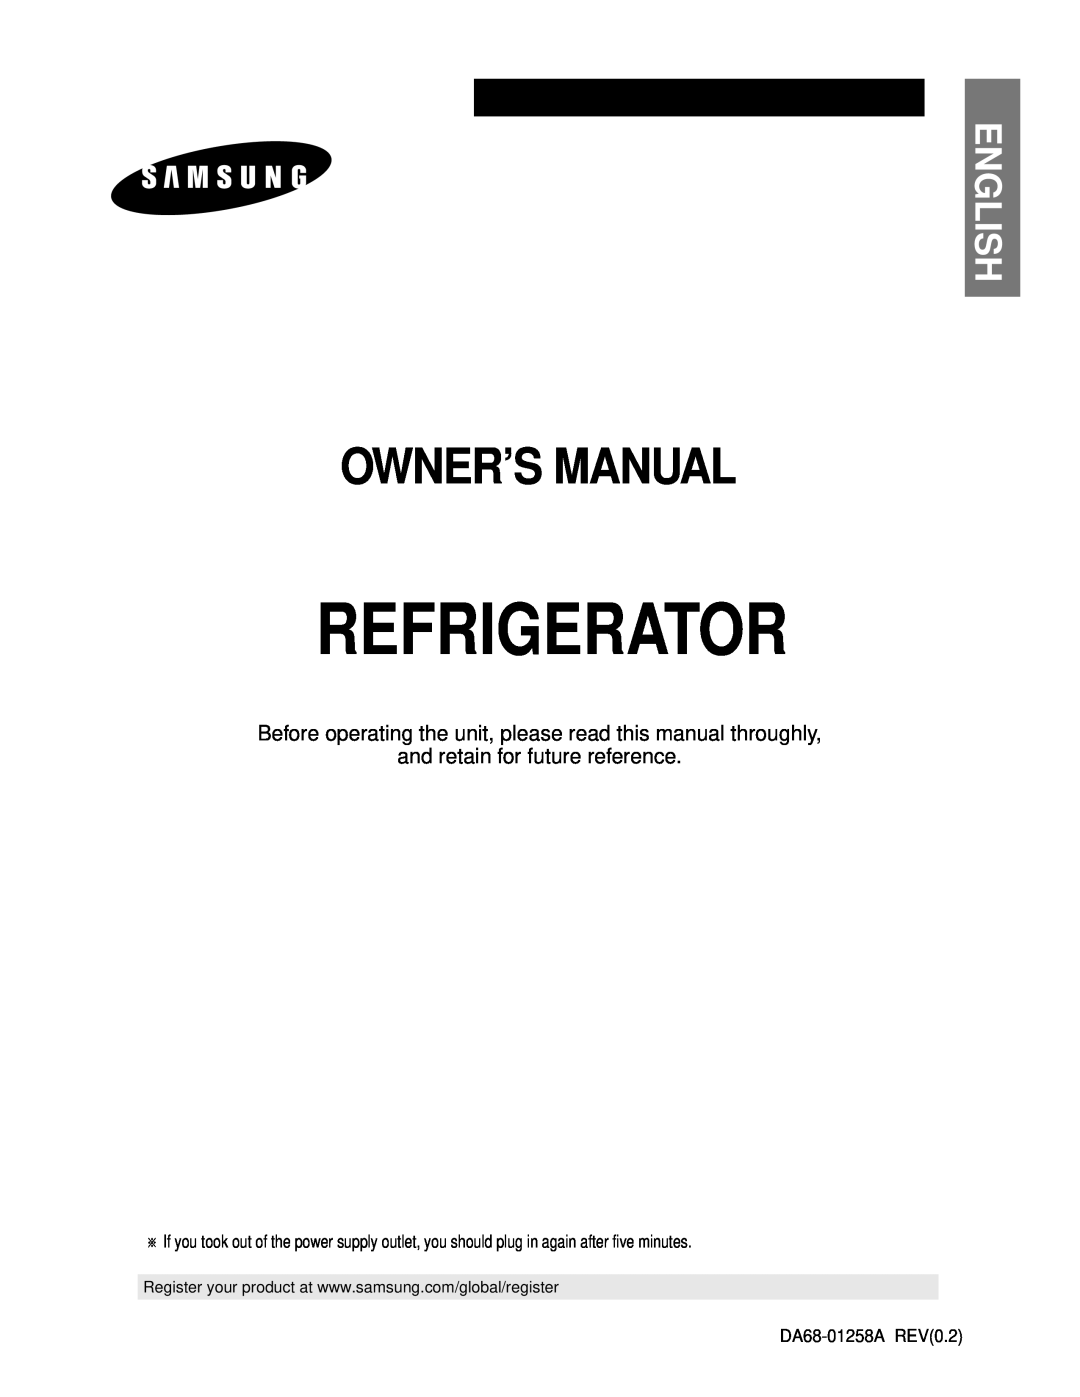 Samsung owner manual and retain for future reference, Refrigerator, English, DA68-01258AREV0.2 